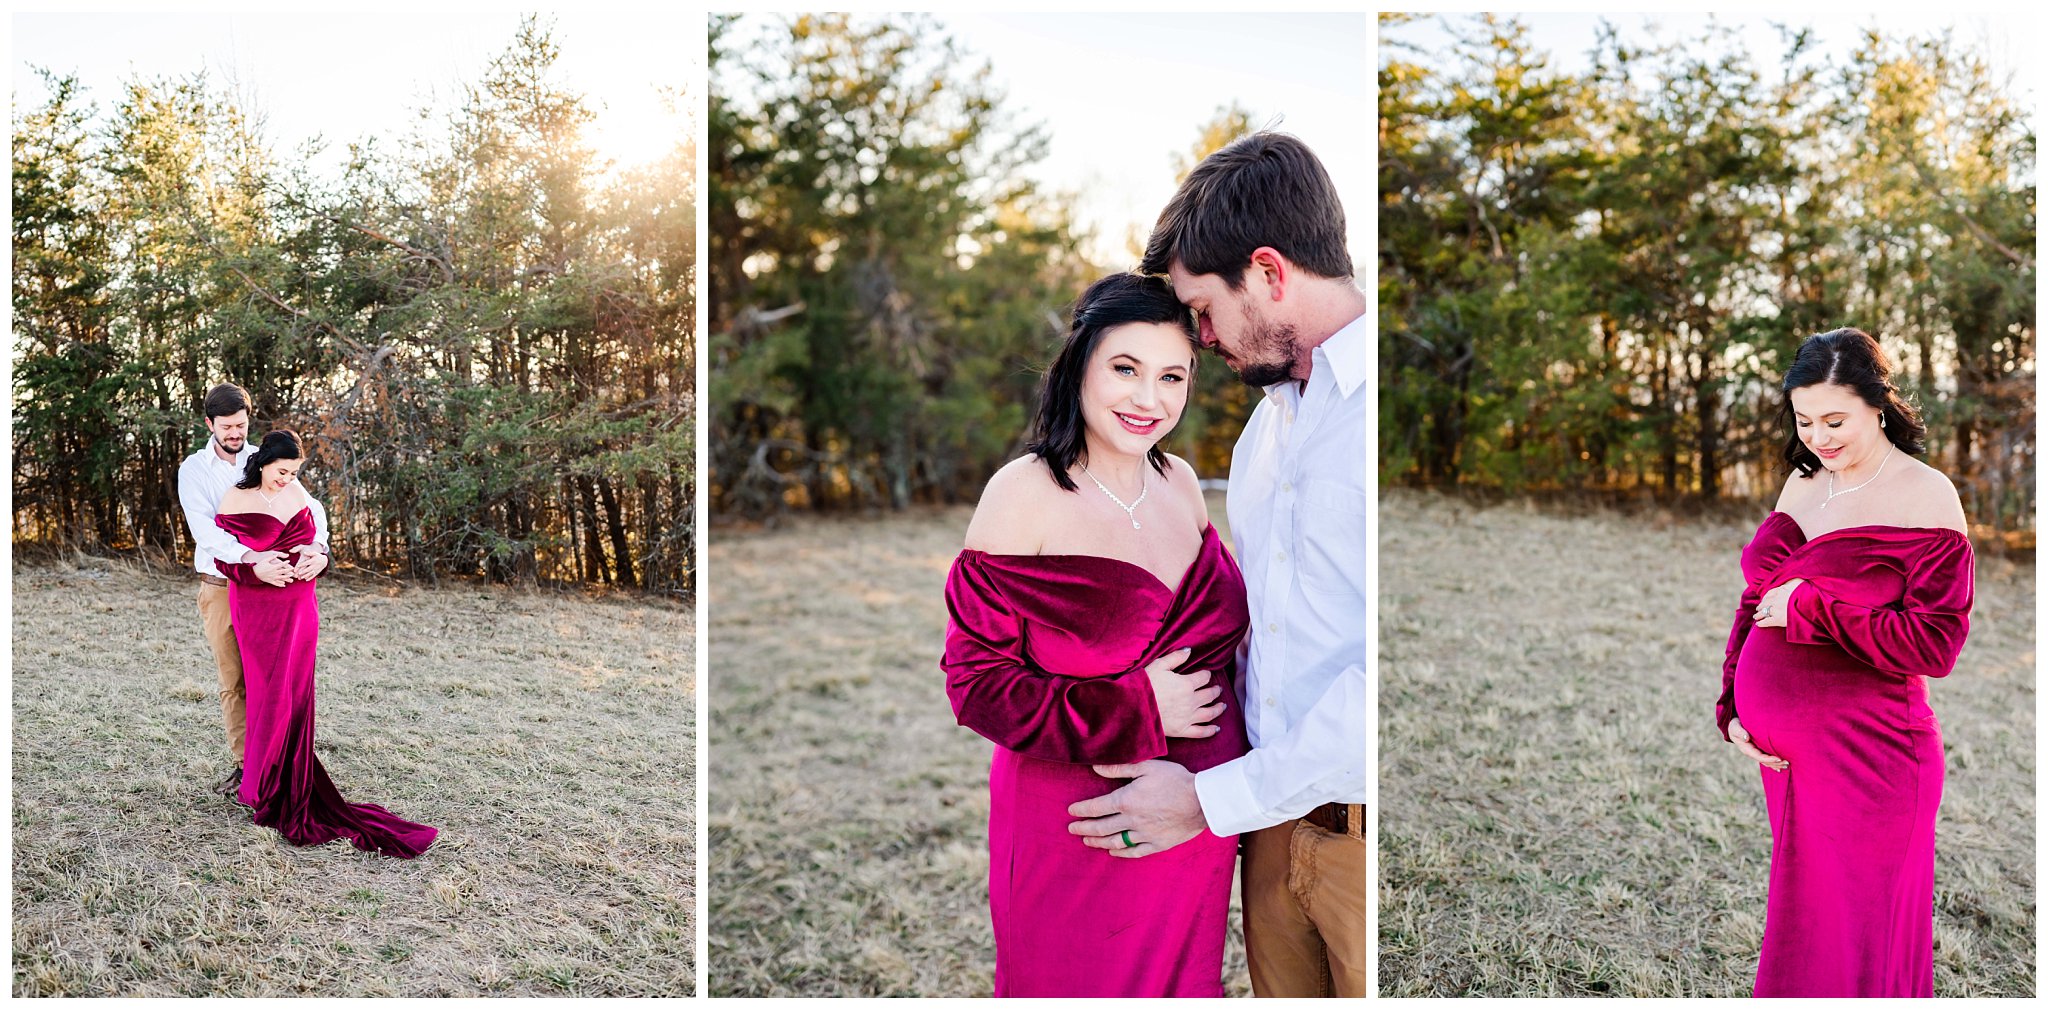 couple poses for their maternity session in snowy mountain field with sun shining behind them